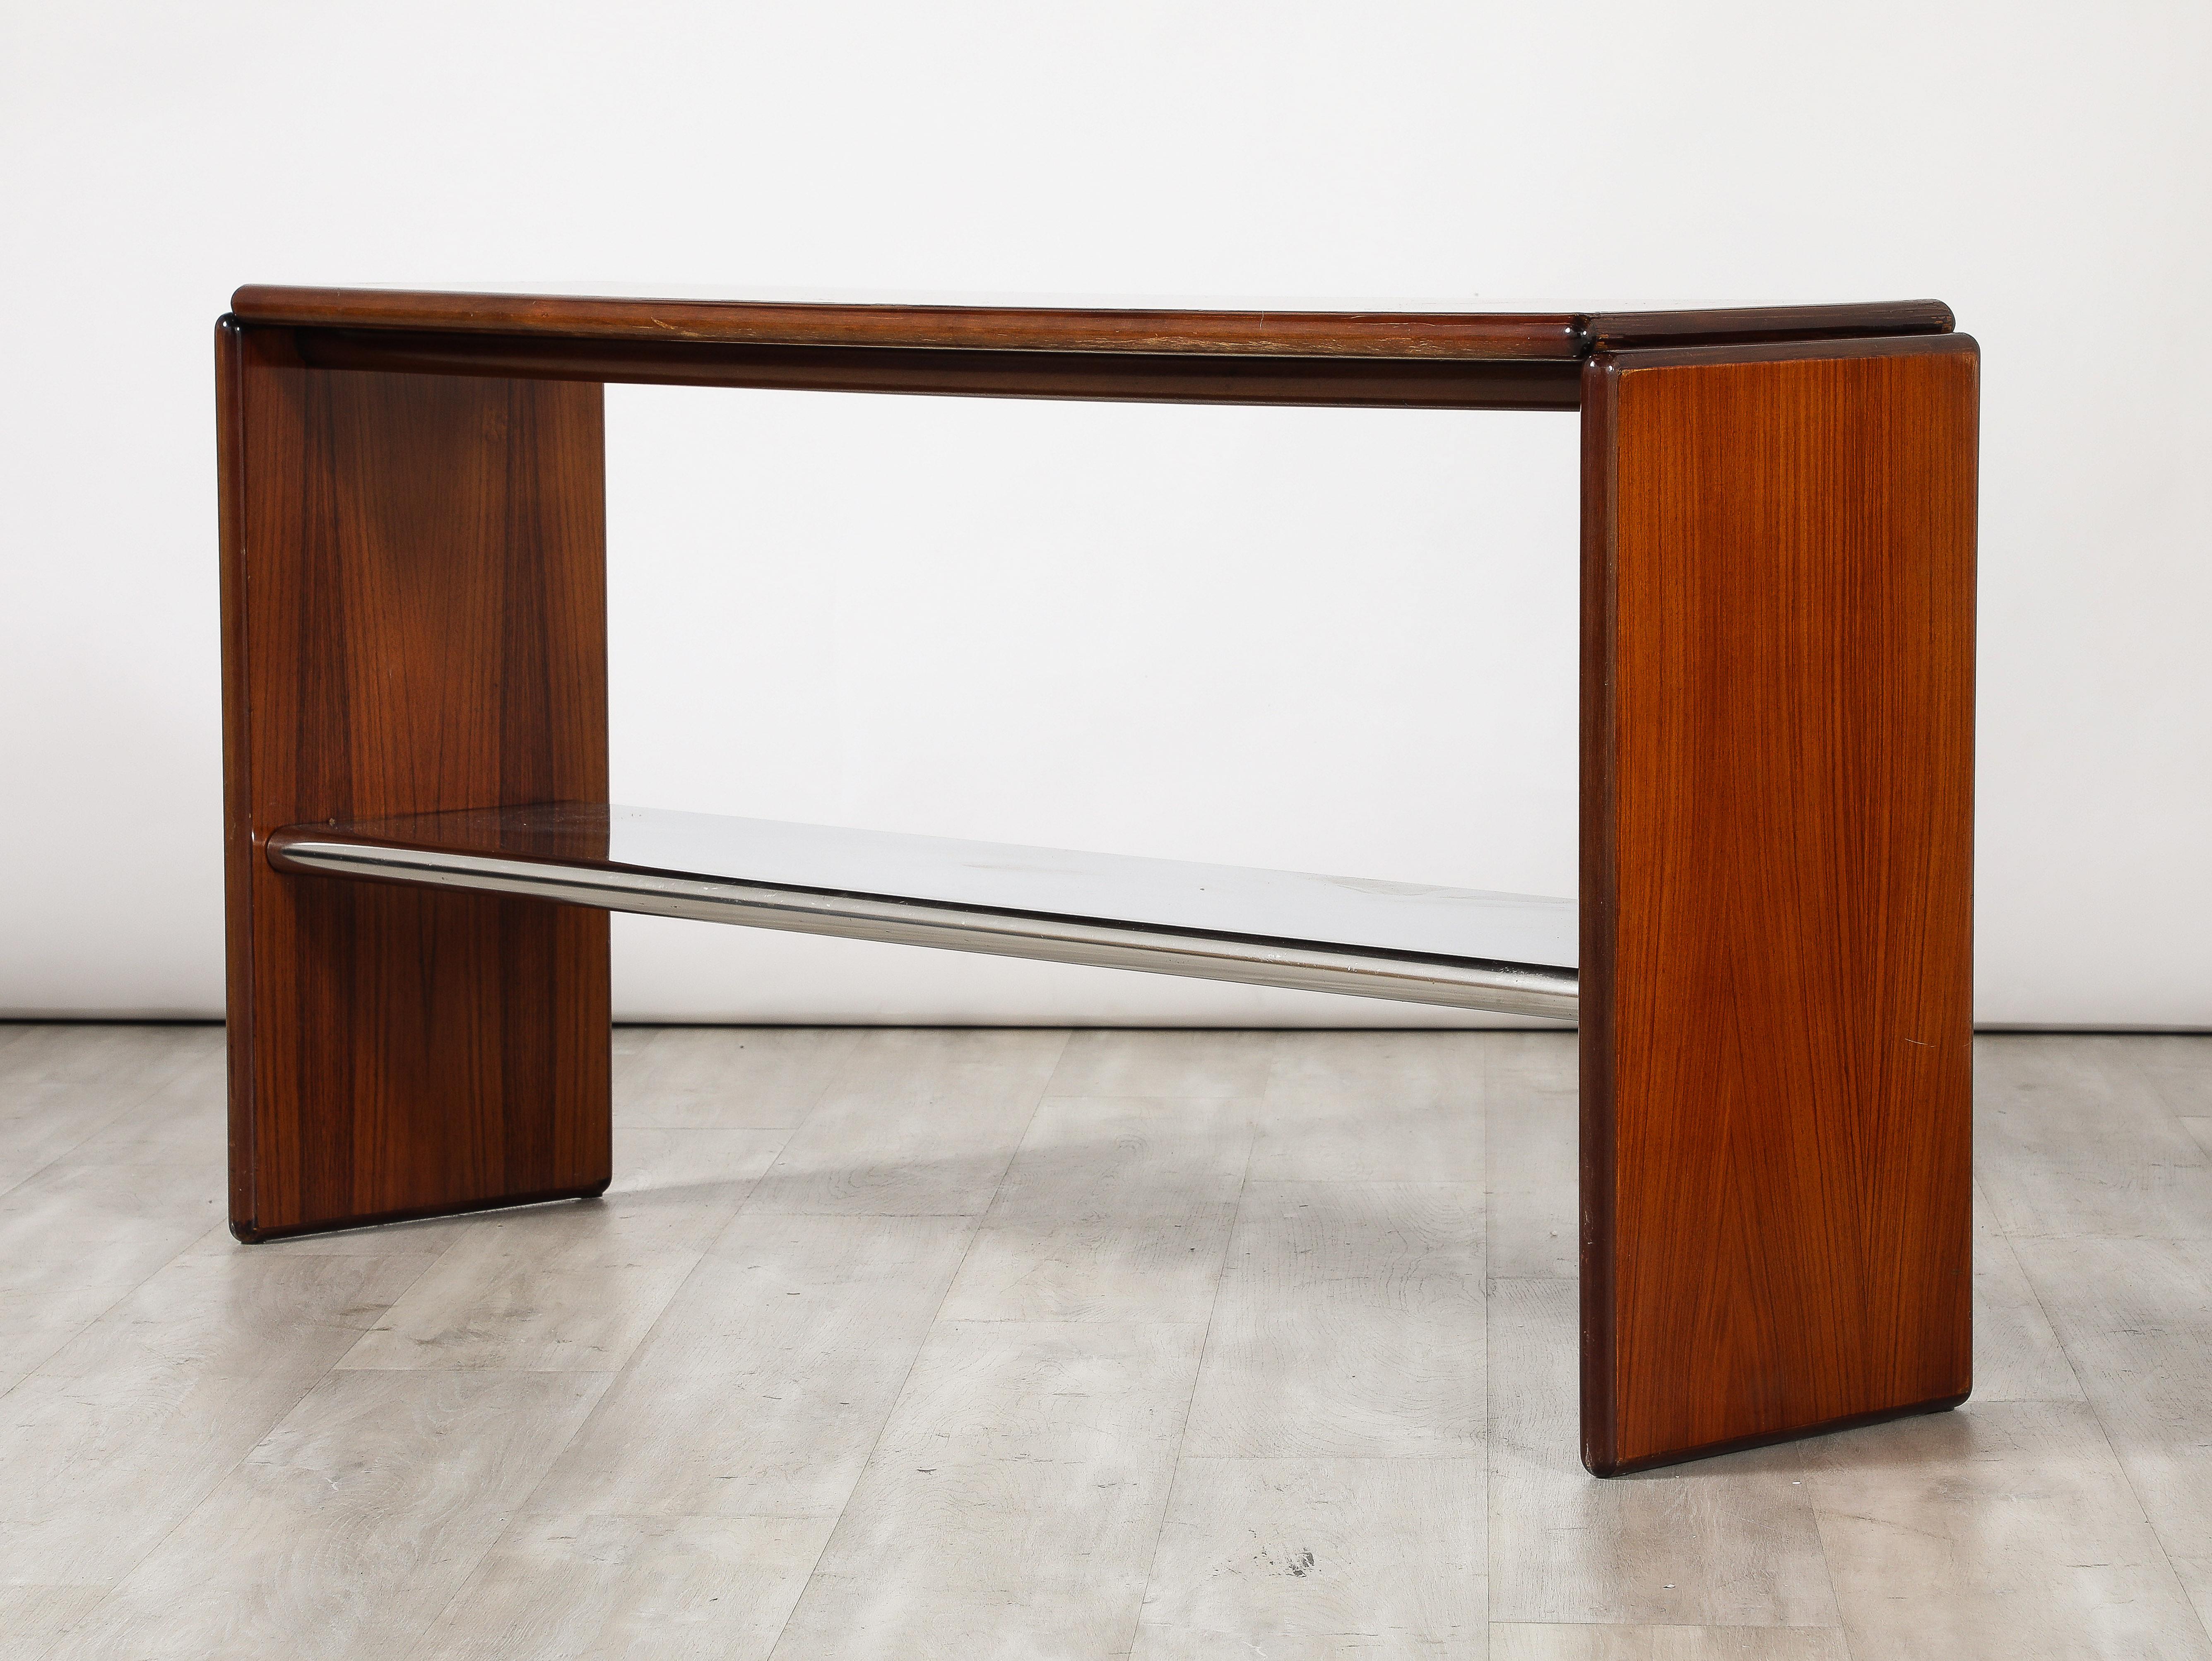 Italian Modernist Wood and Chrome Console Table, Italy, circa 1960 For Sale 6